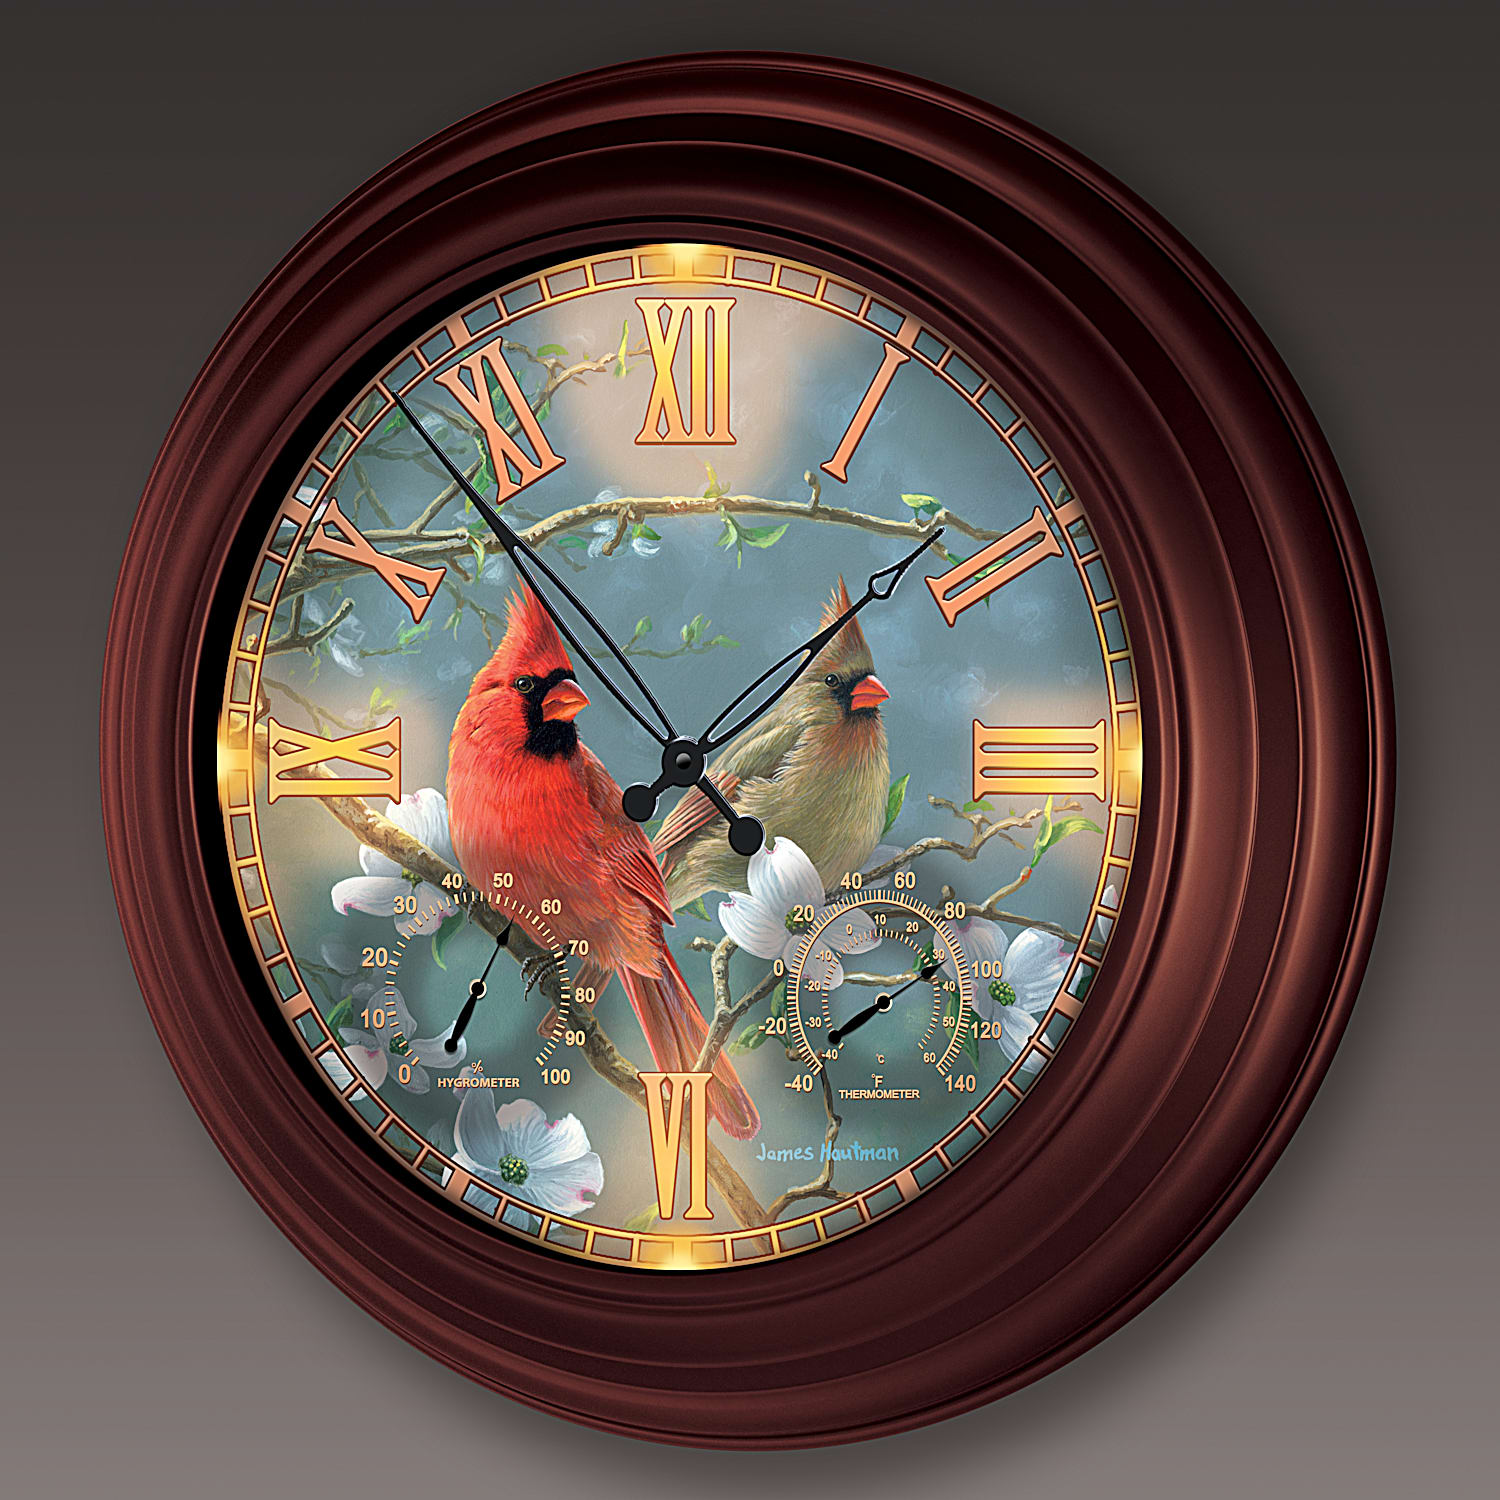  The Bradford Exchange Nature's Masterpiece Cardinal-Themed  Outdoor Illuminated Atomic Wall Clock : Home & Kitchen